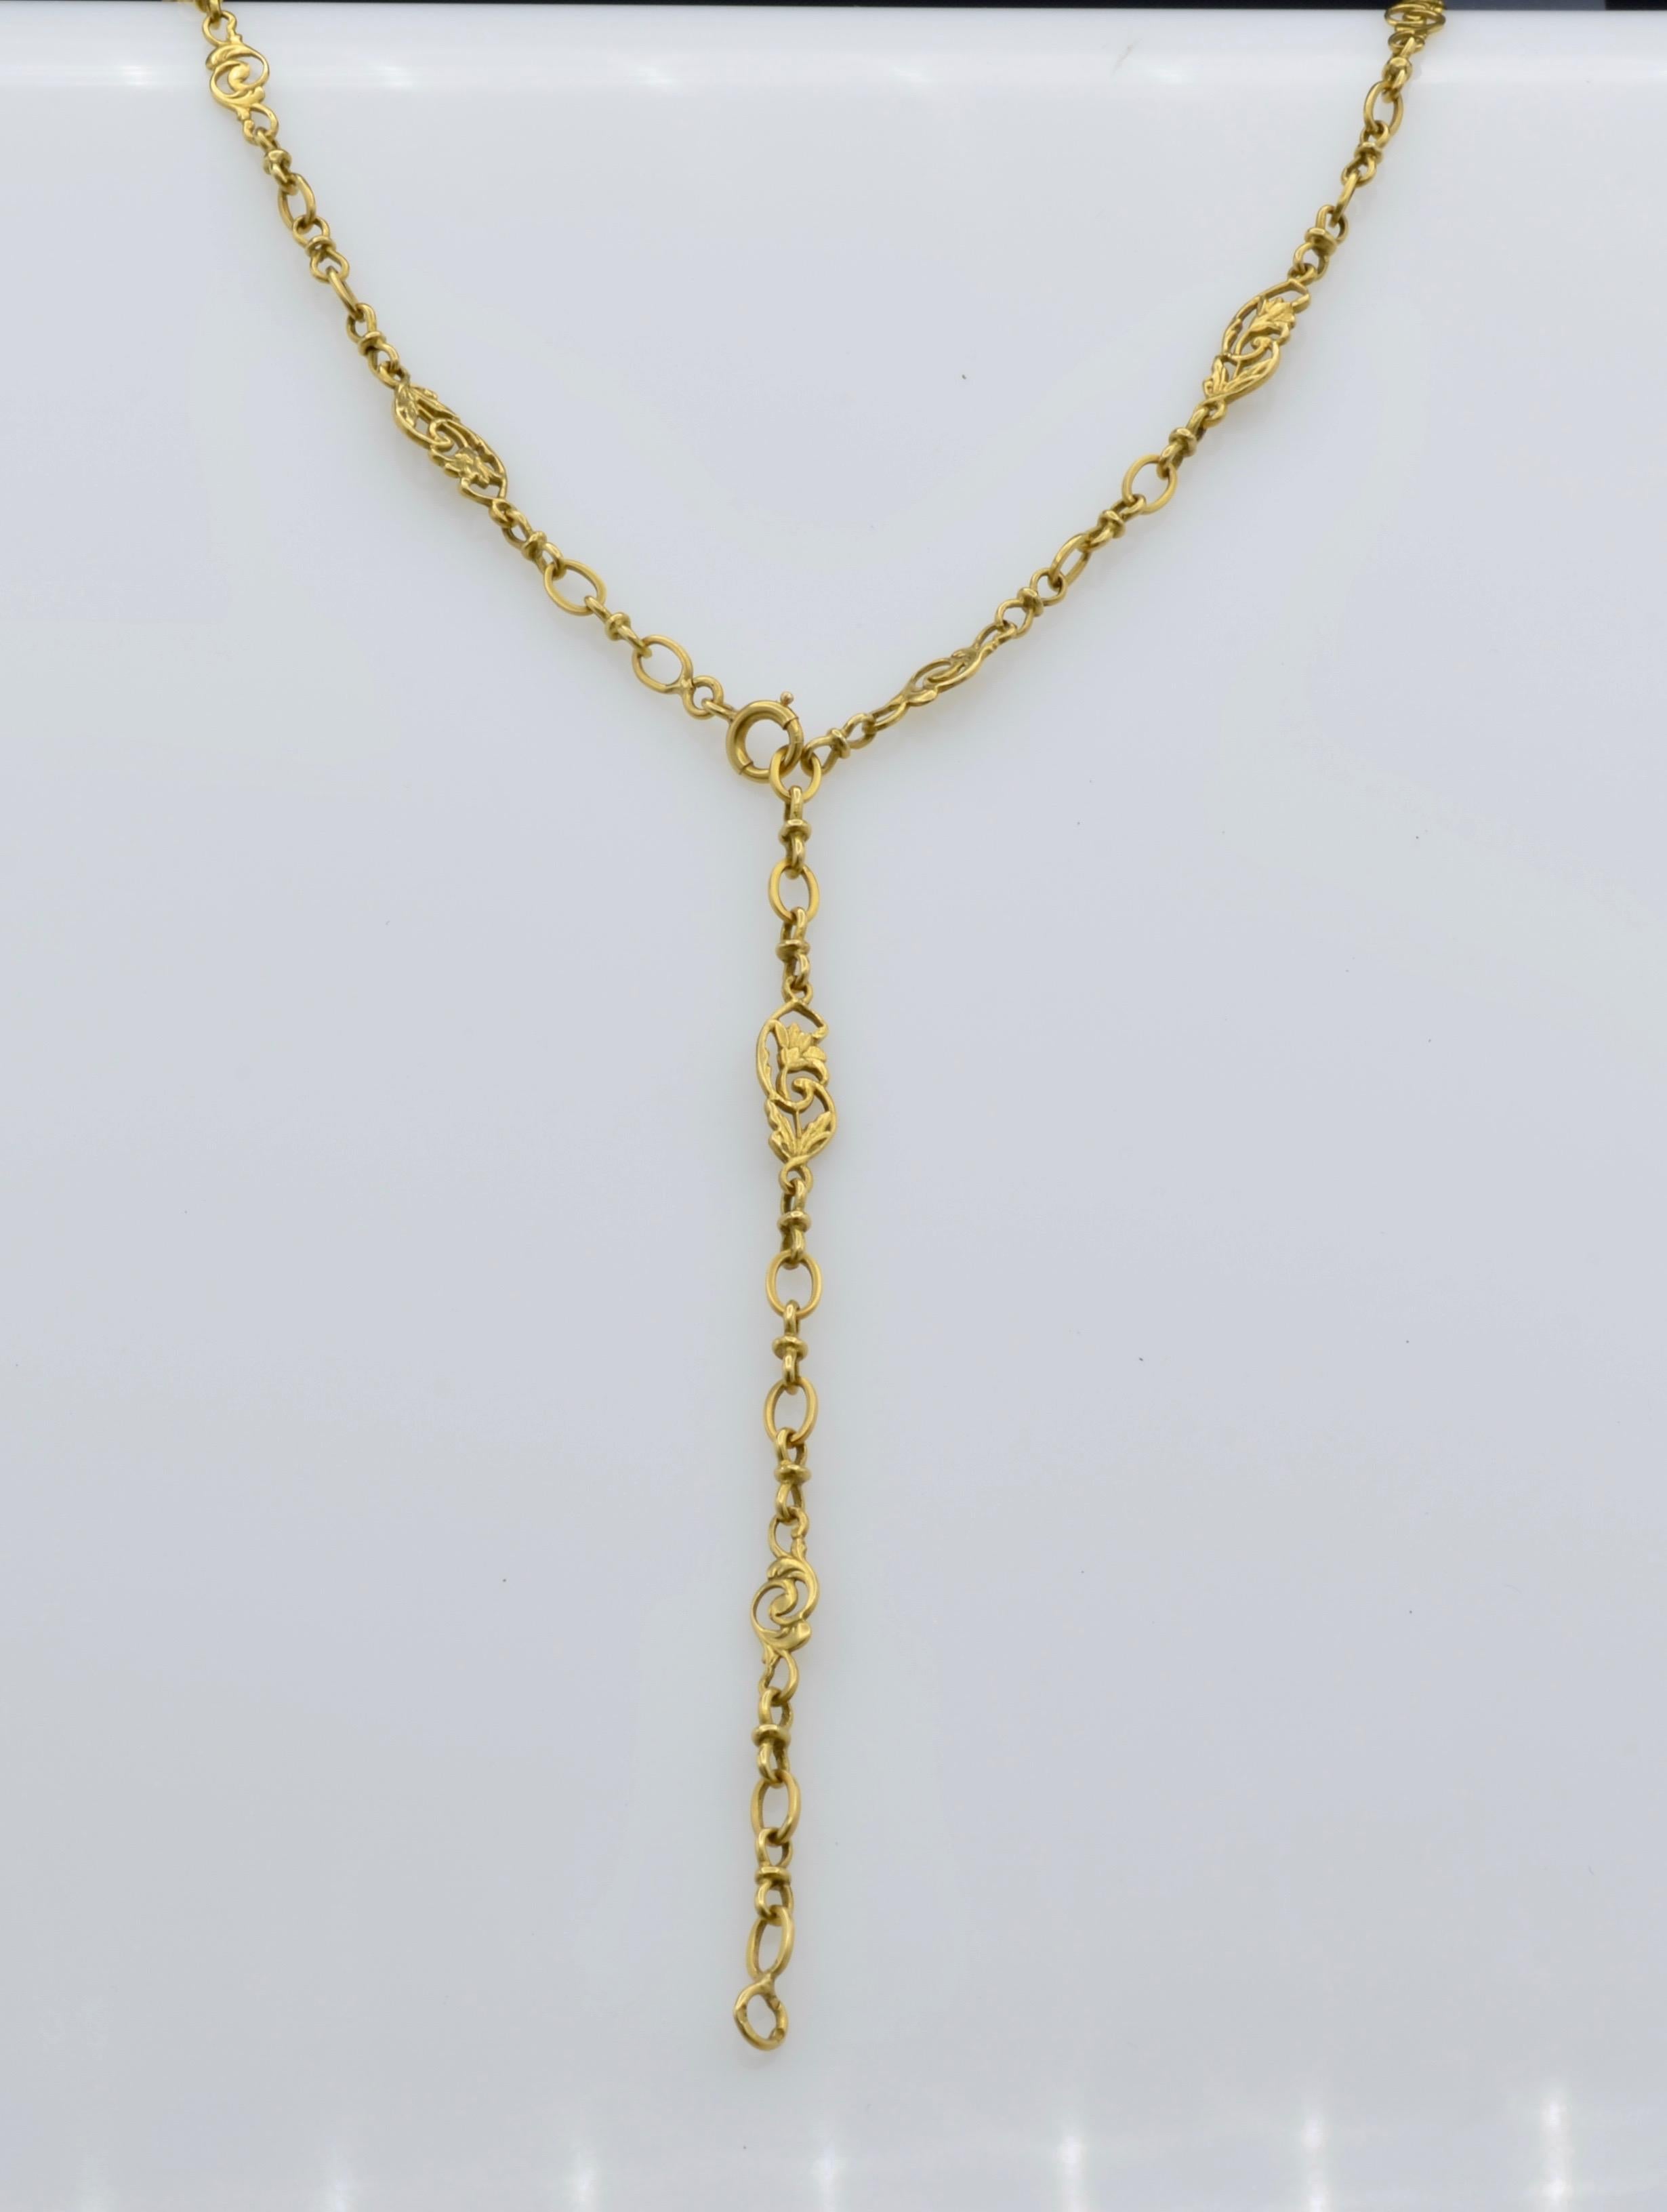 French Antique Sautoir Yellow Gold Chain Link Necklace with Lillies and ...